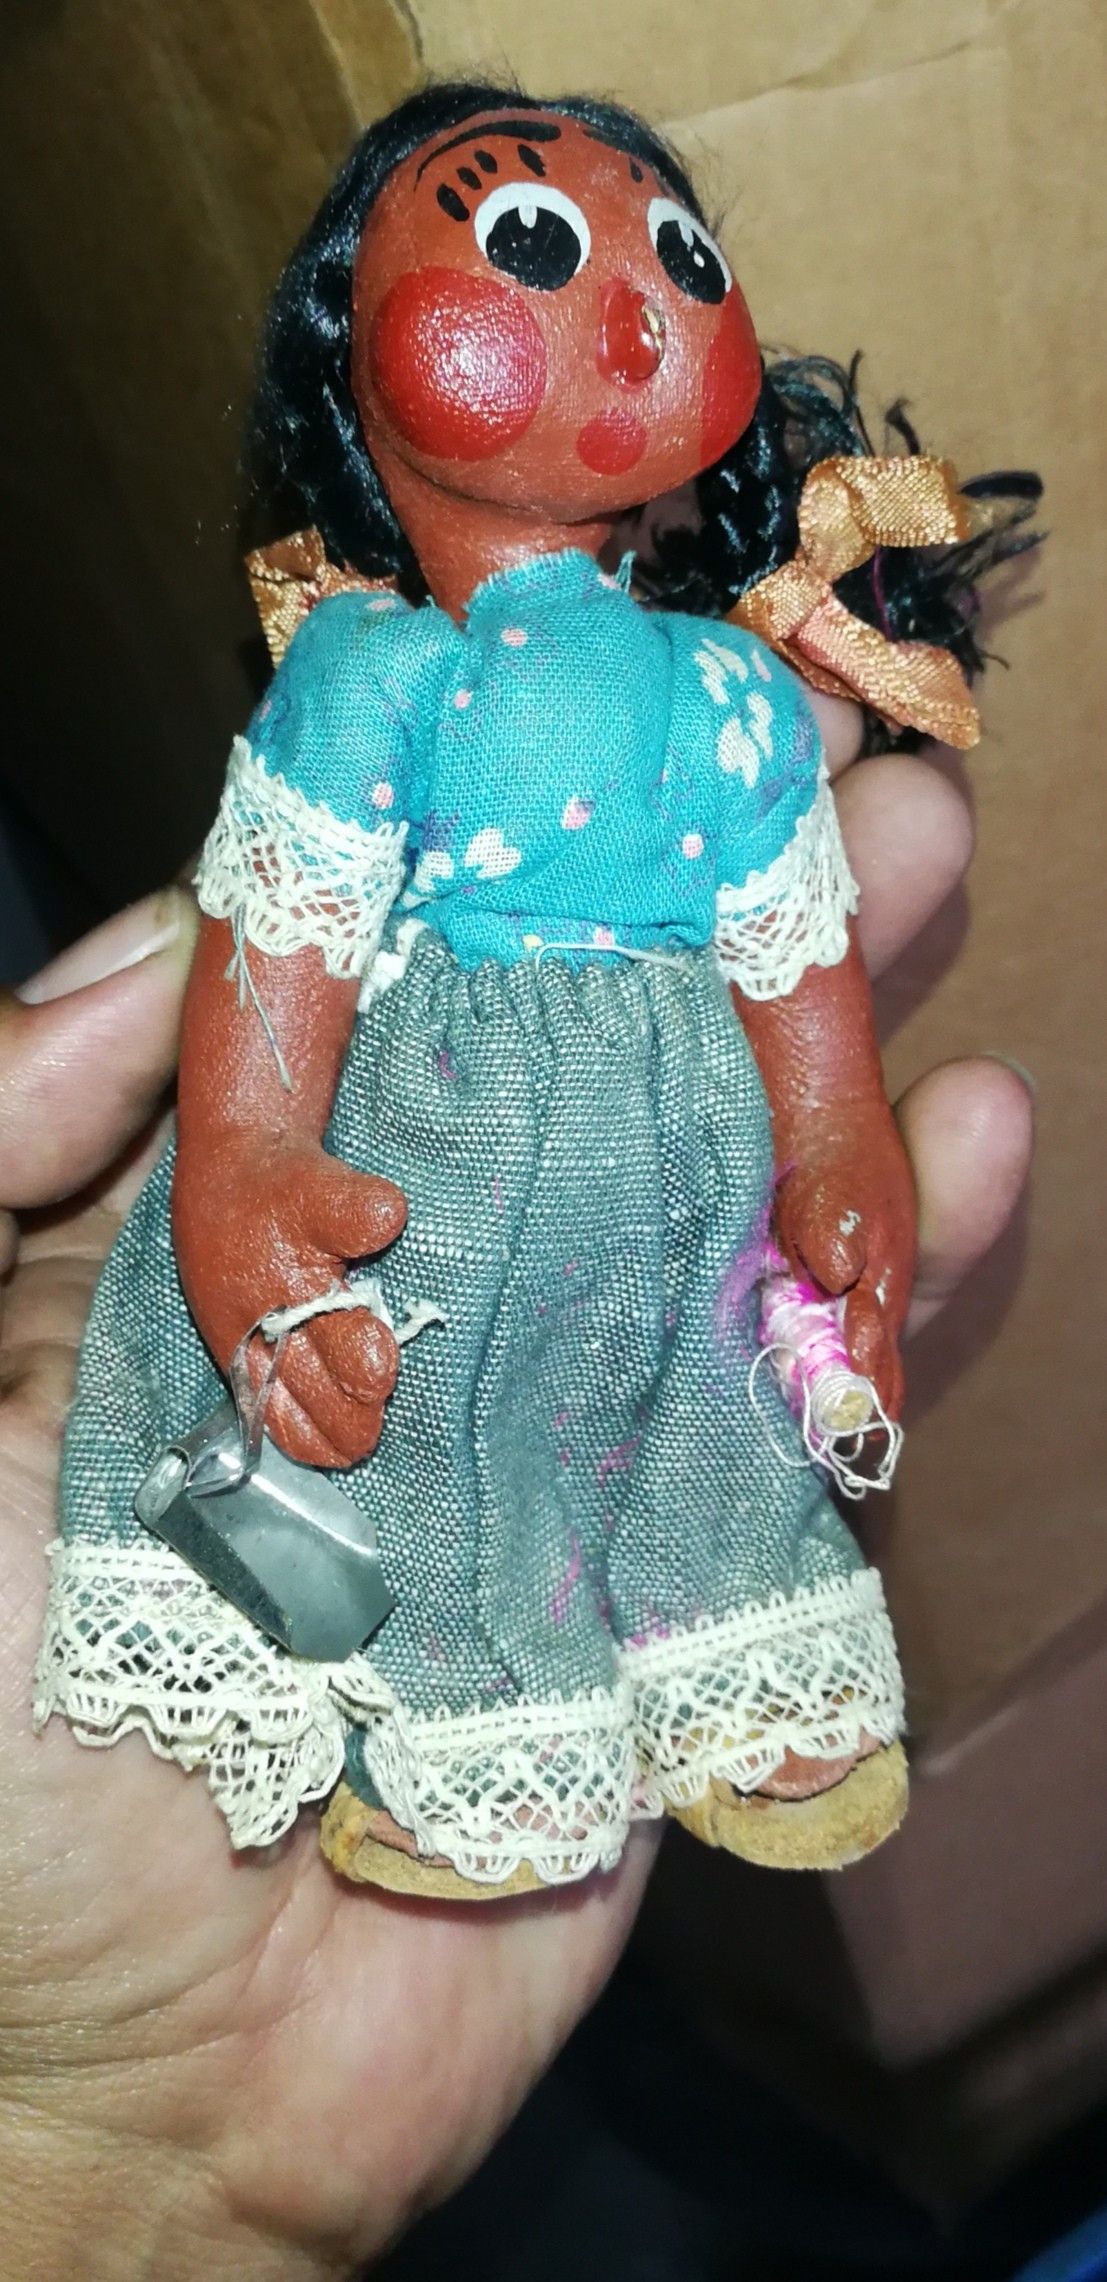 Antique Vintage Old Doll Maybe 1960s-70s Could be Earlier. From Mexico